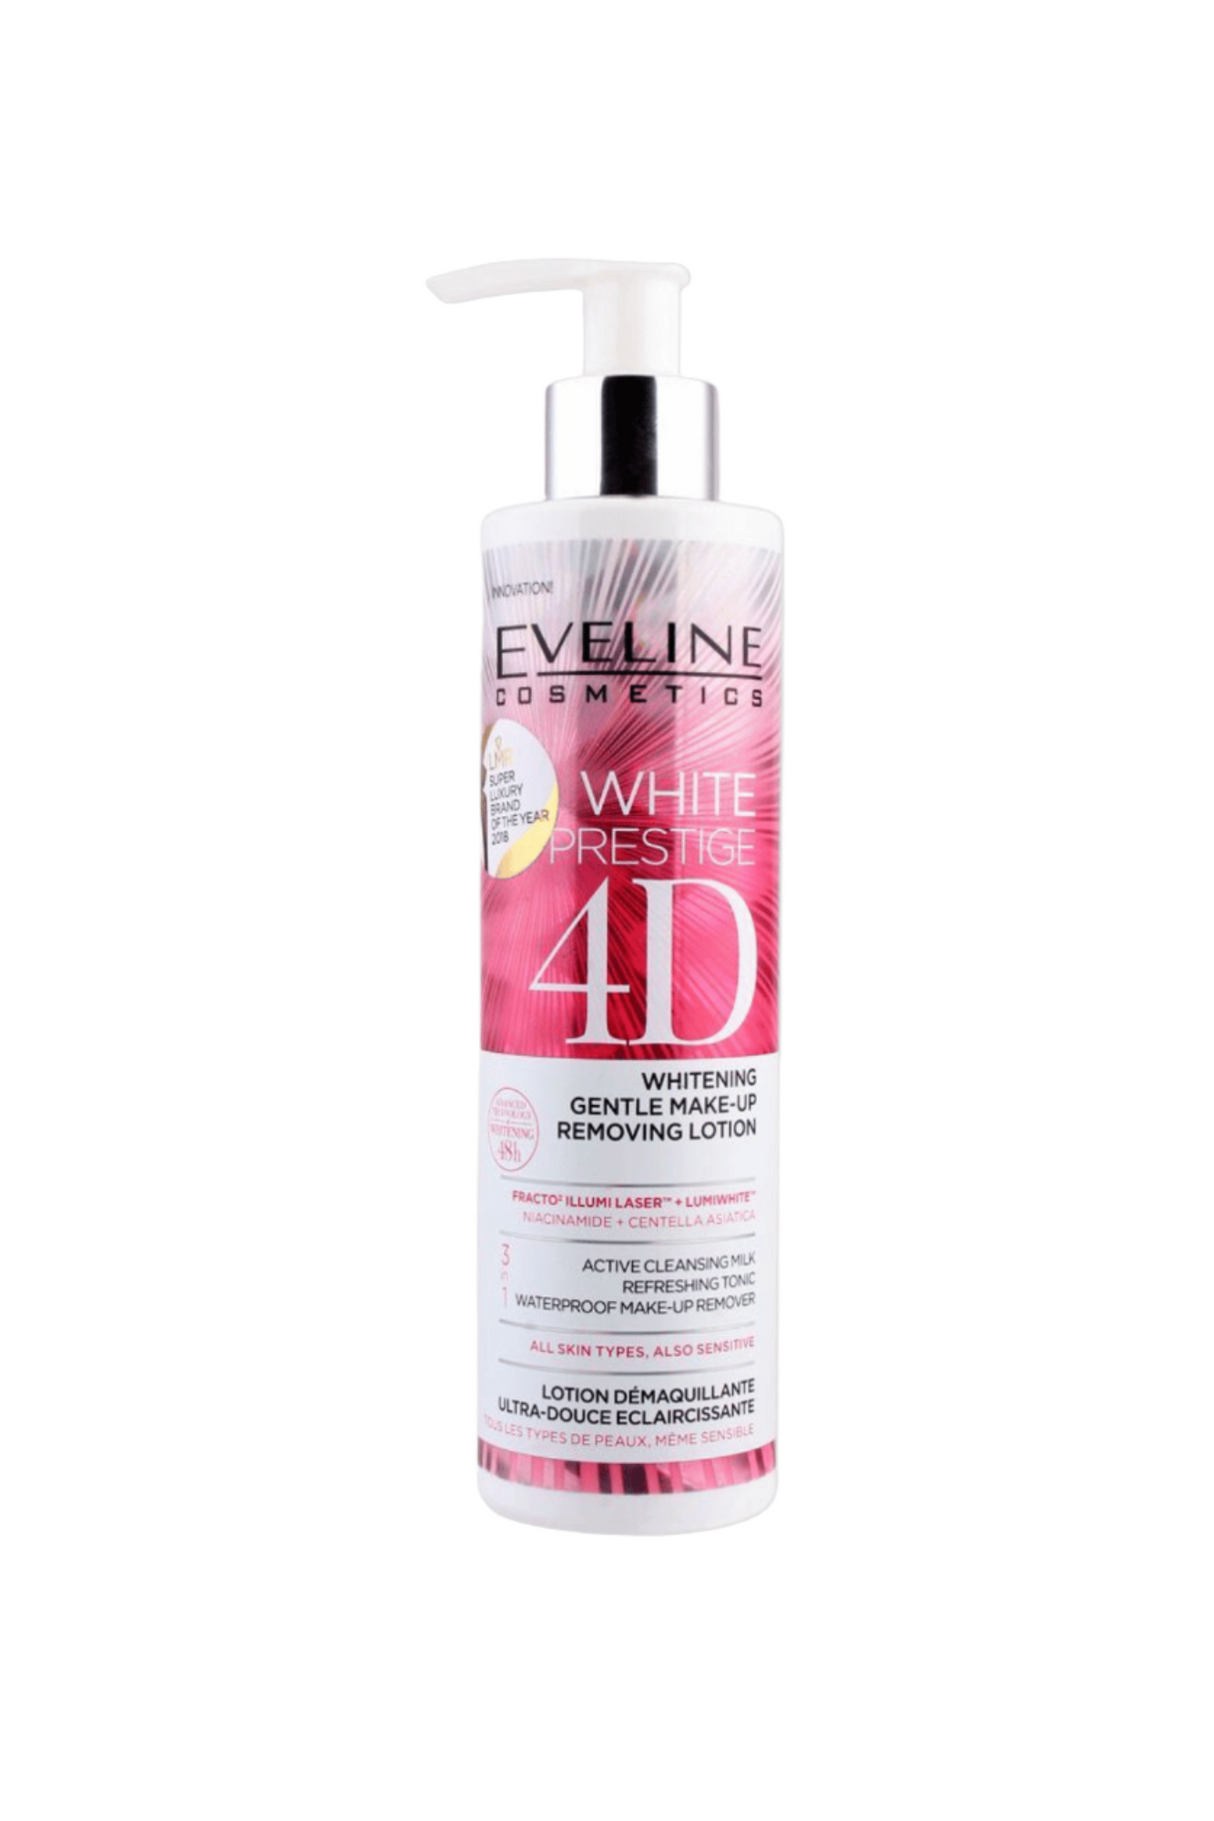 eveline makeup remover lotion 4d 245ml